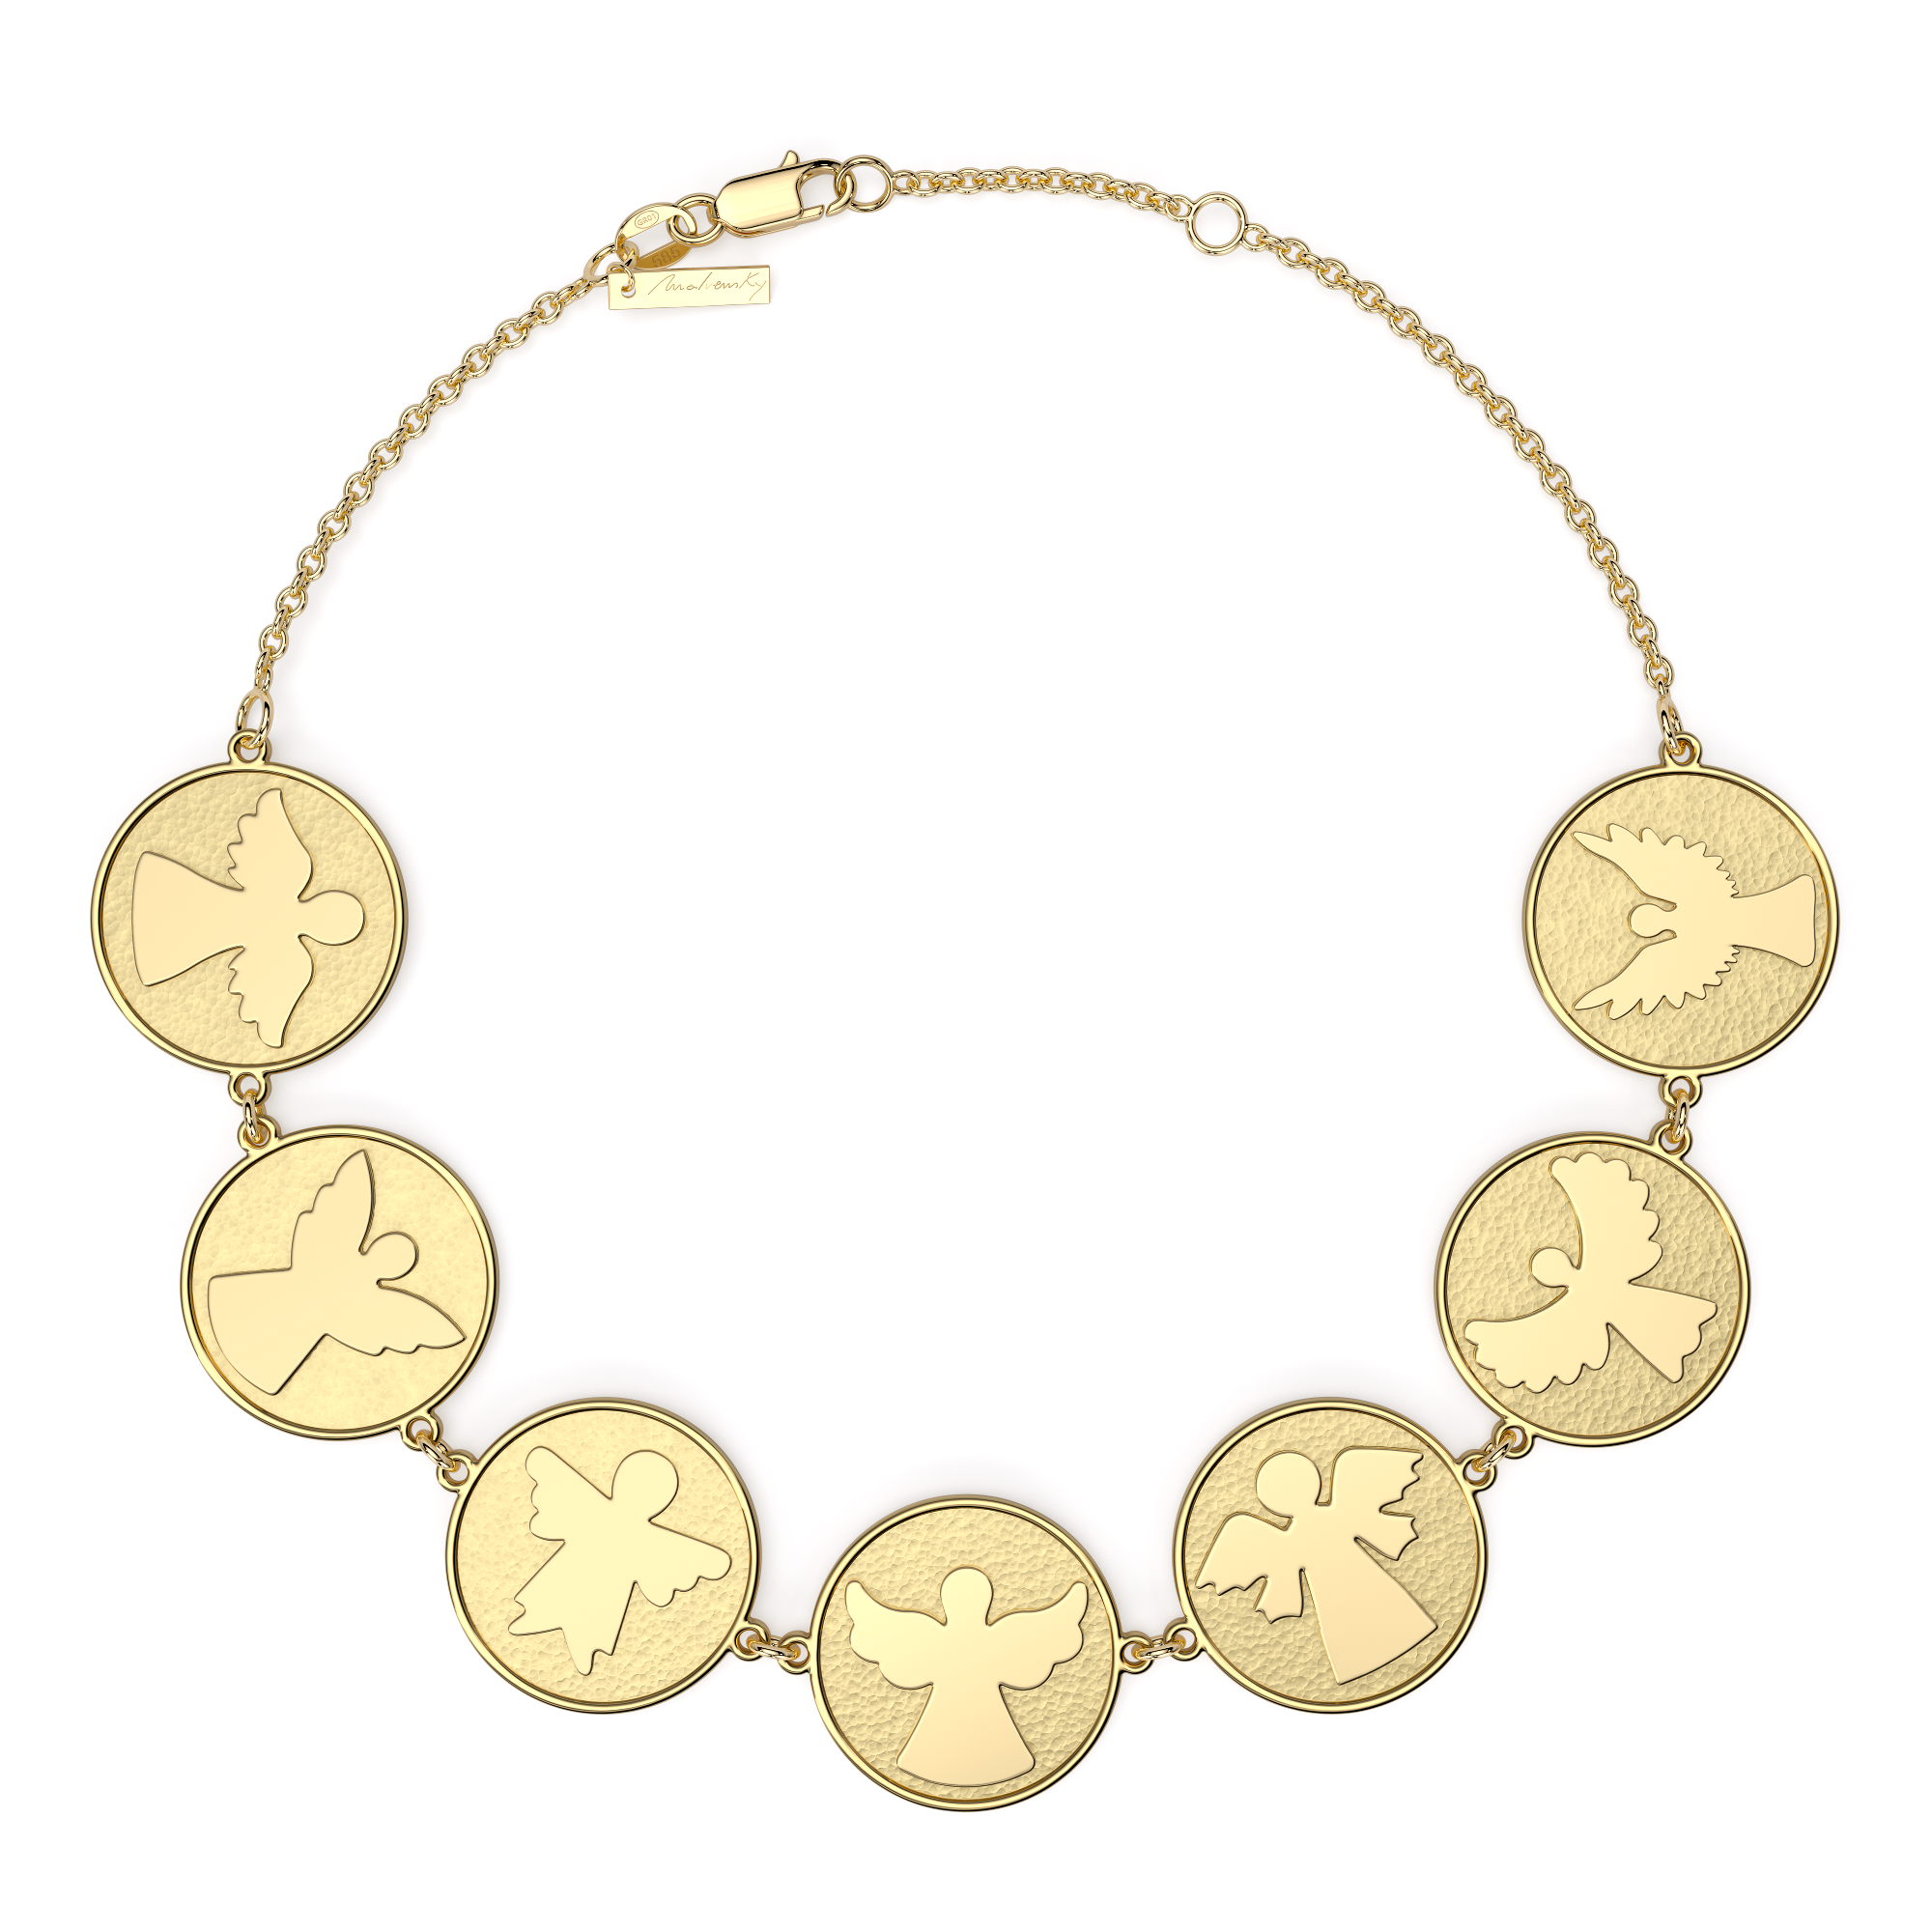 Yellow gold 7 Archangels on chain bracelet